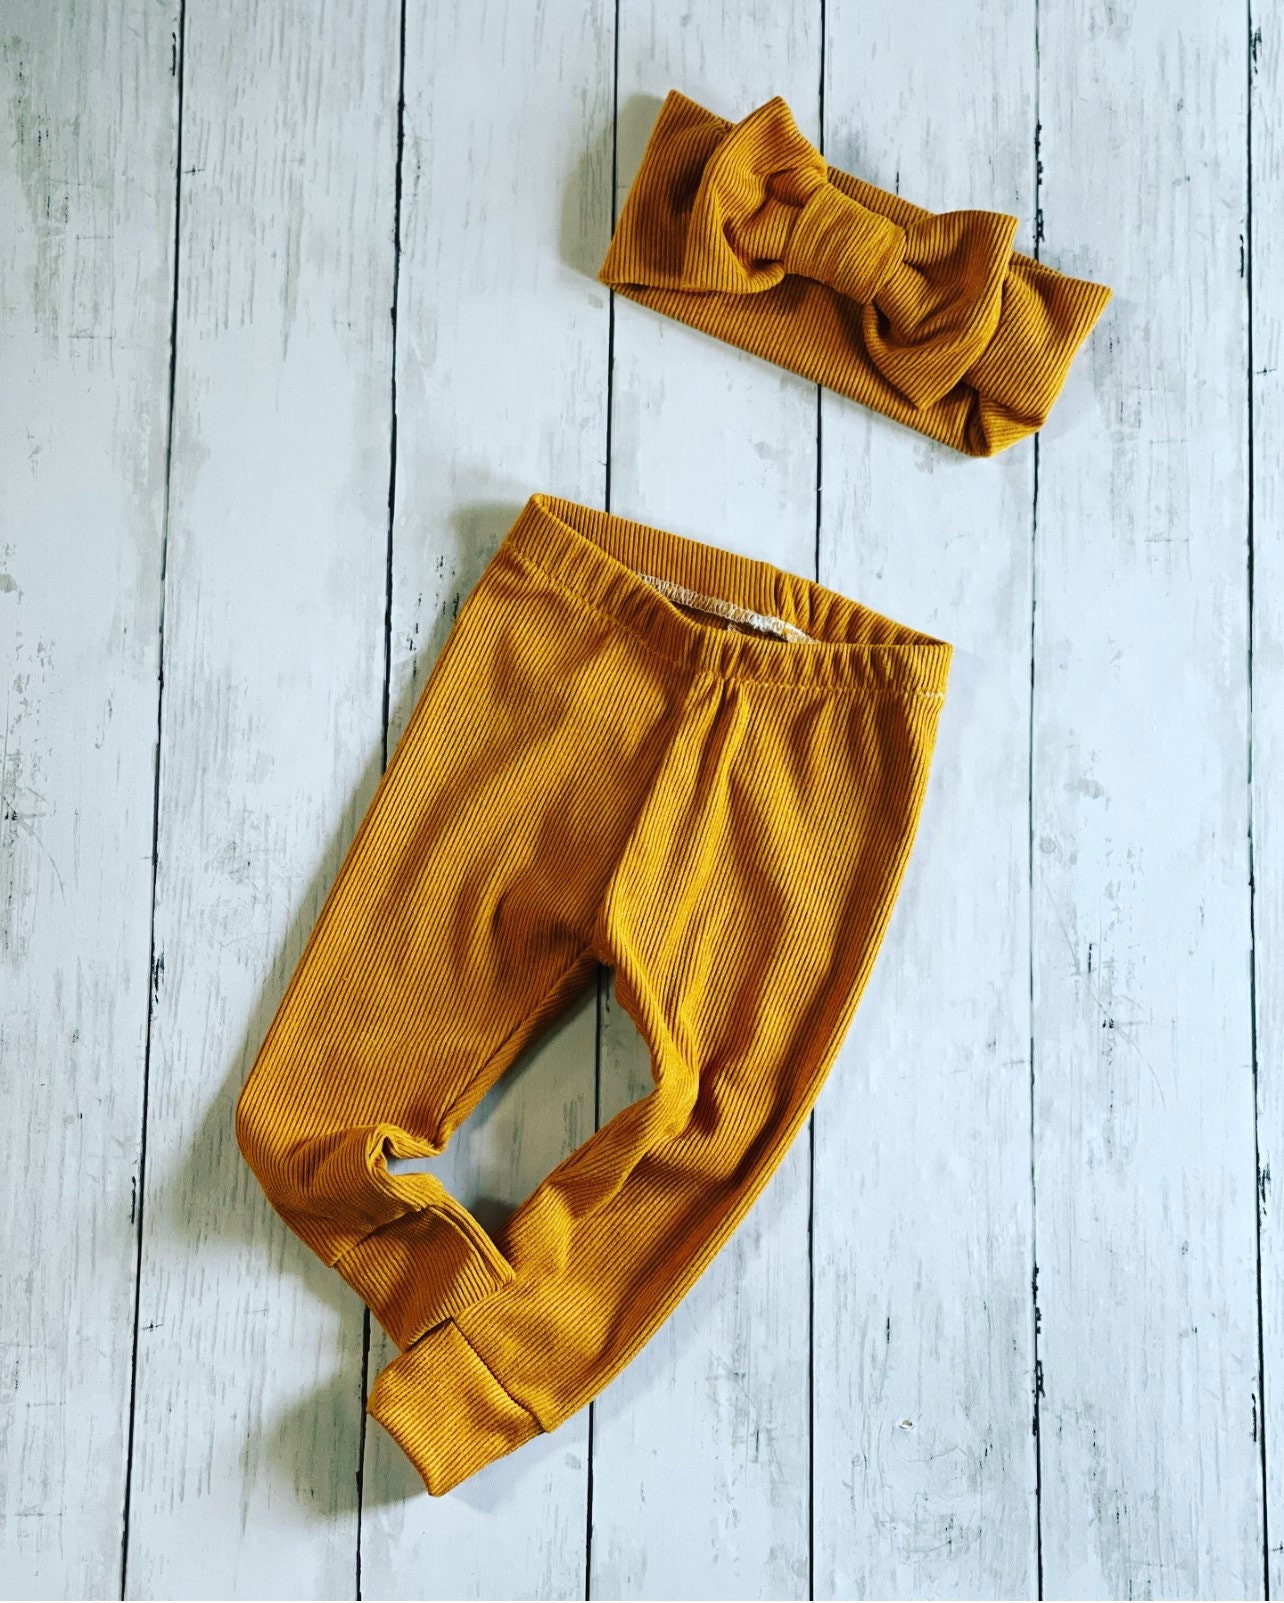 Mustard Solid Colored Leggings One Size - Plus Size 